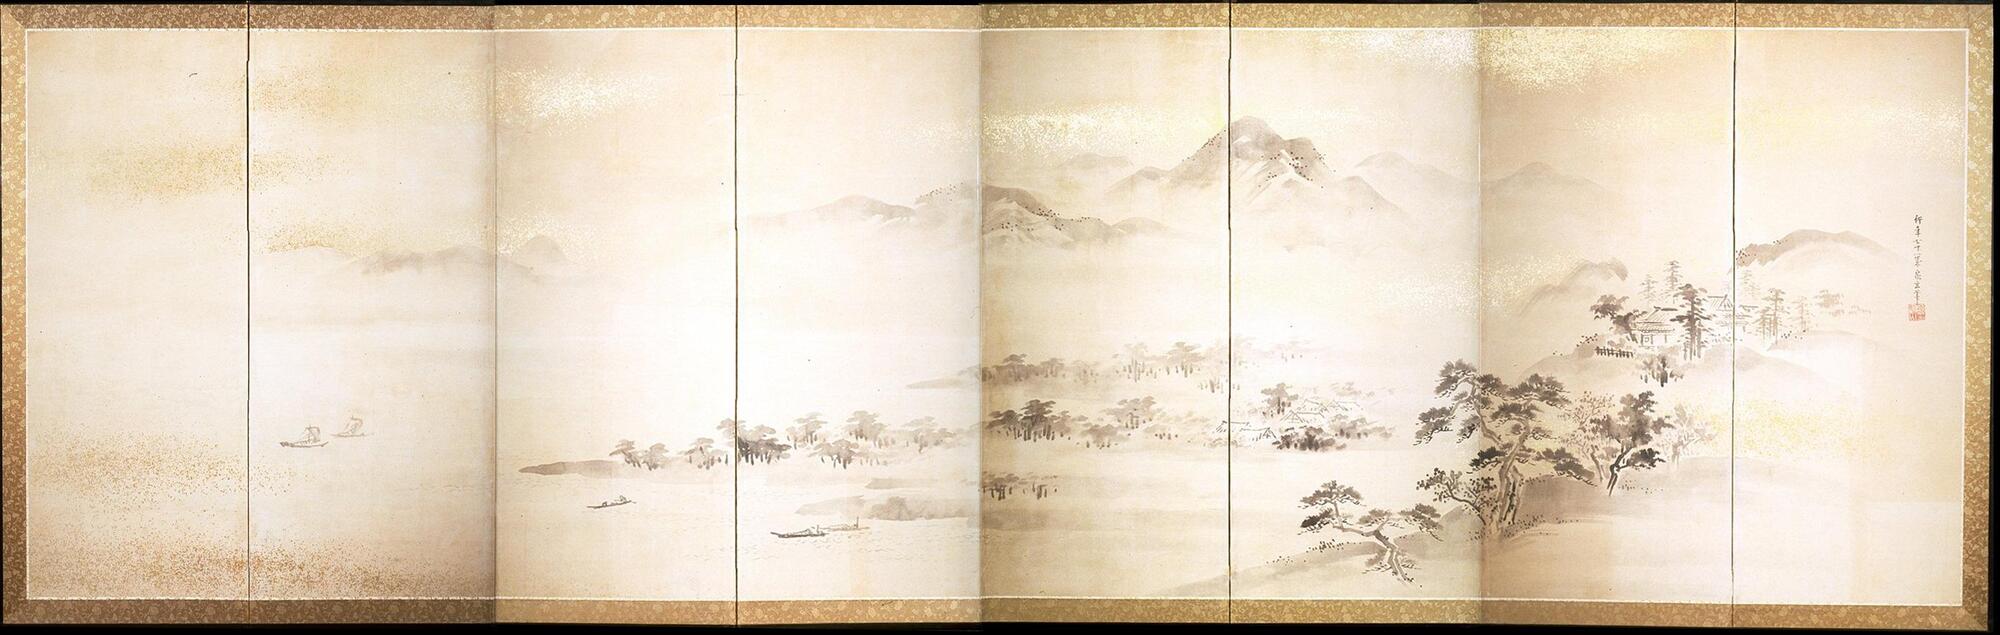 One of a pair of six-fold screens, this piece depicts mountains, trees, and the coast with boats on the water. The land is to the right with the water on the left. In the background is a faint mountain range. The background is also decorated with gold. The signature is on the far right edge in the middle and is followed by a red seal.